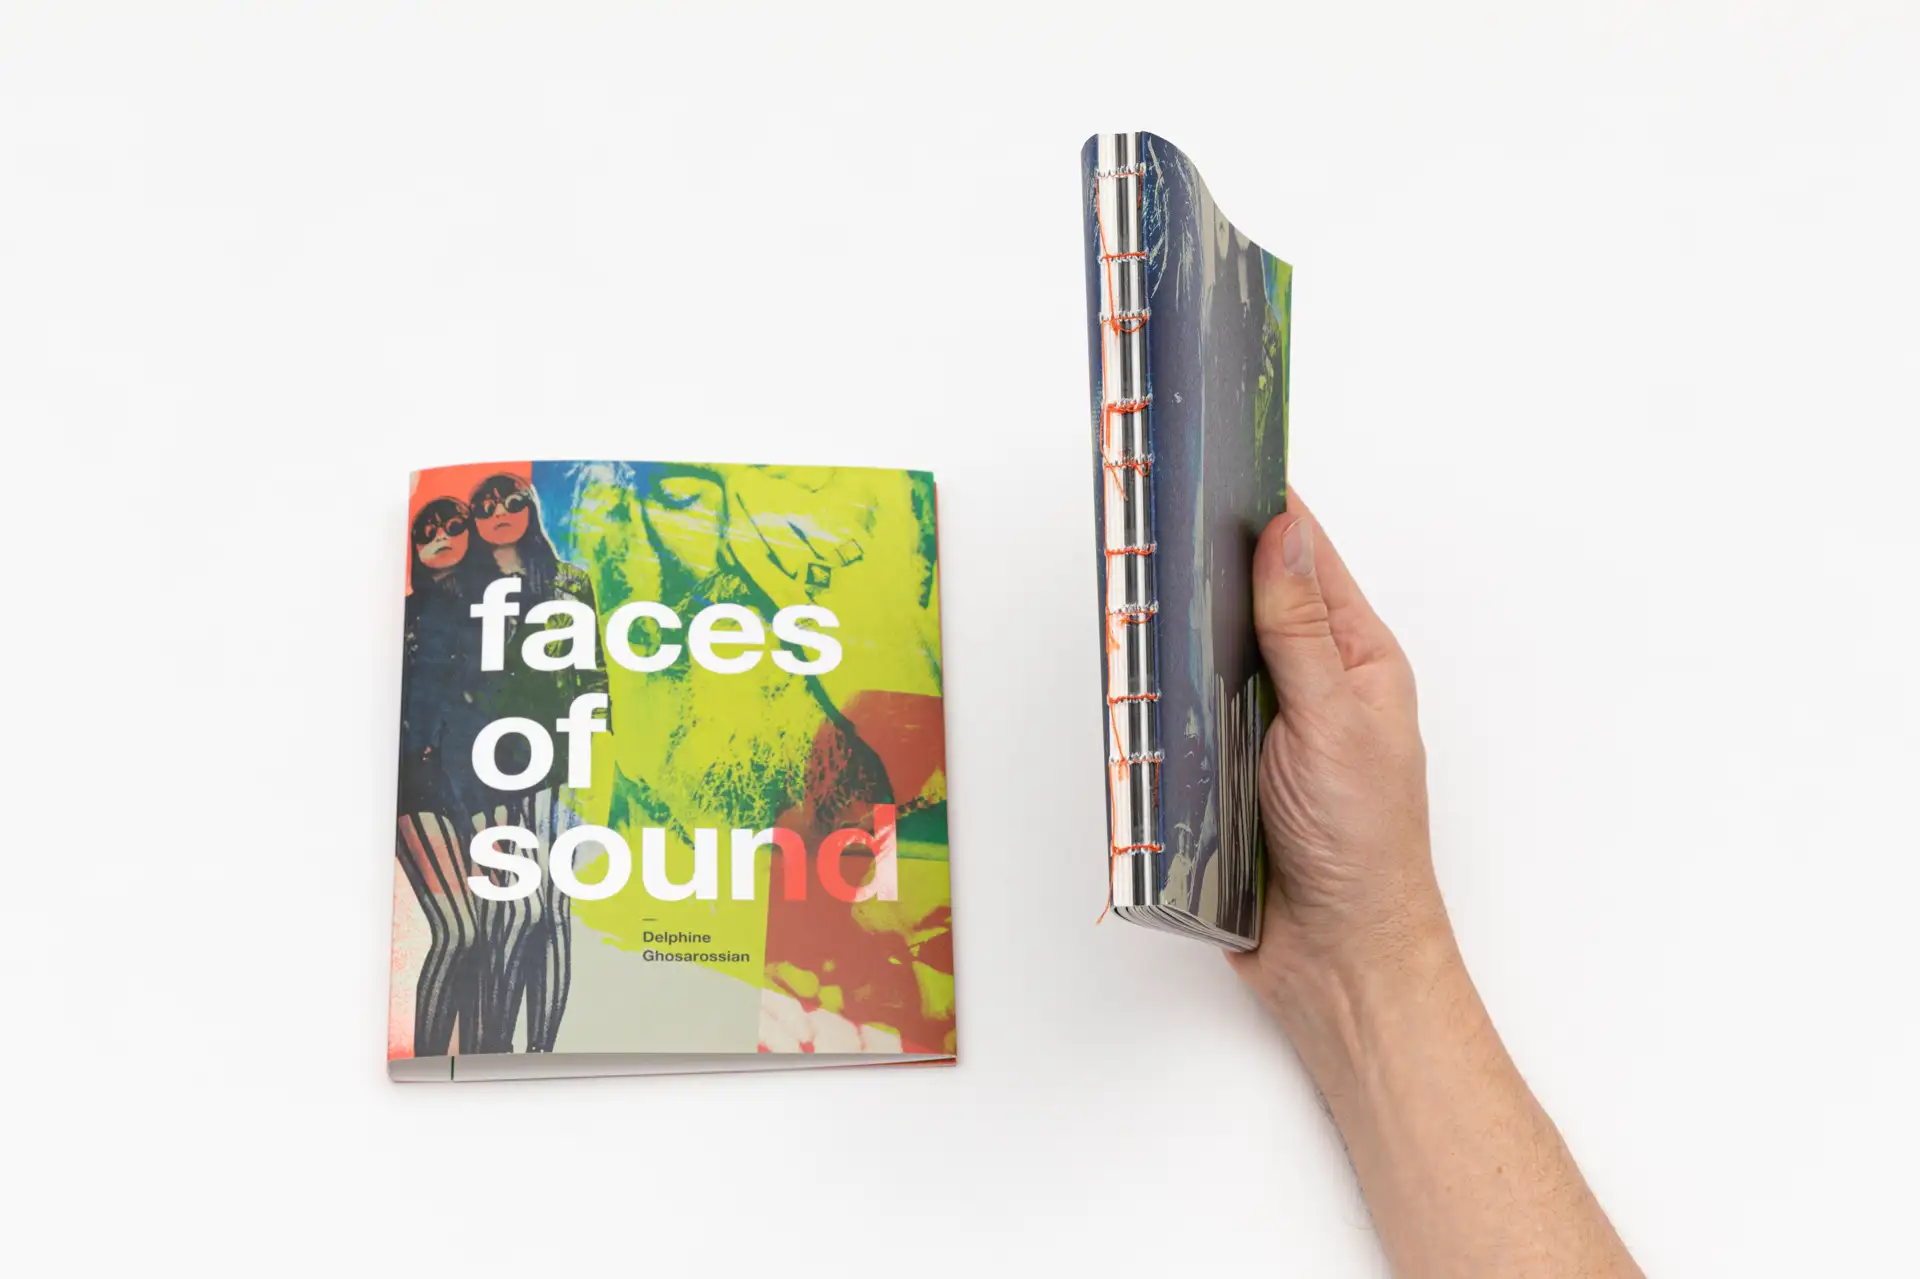 Image presenting the project Faces of Sound